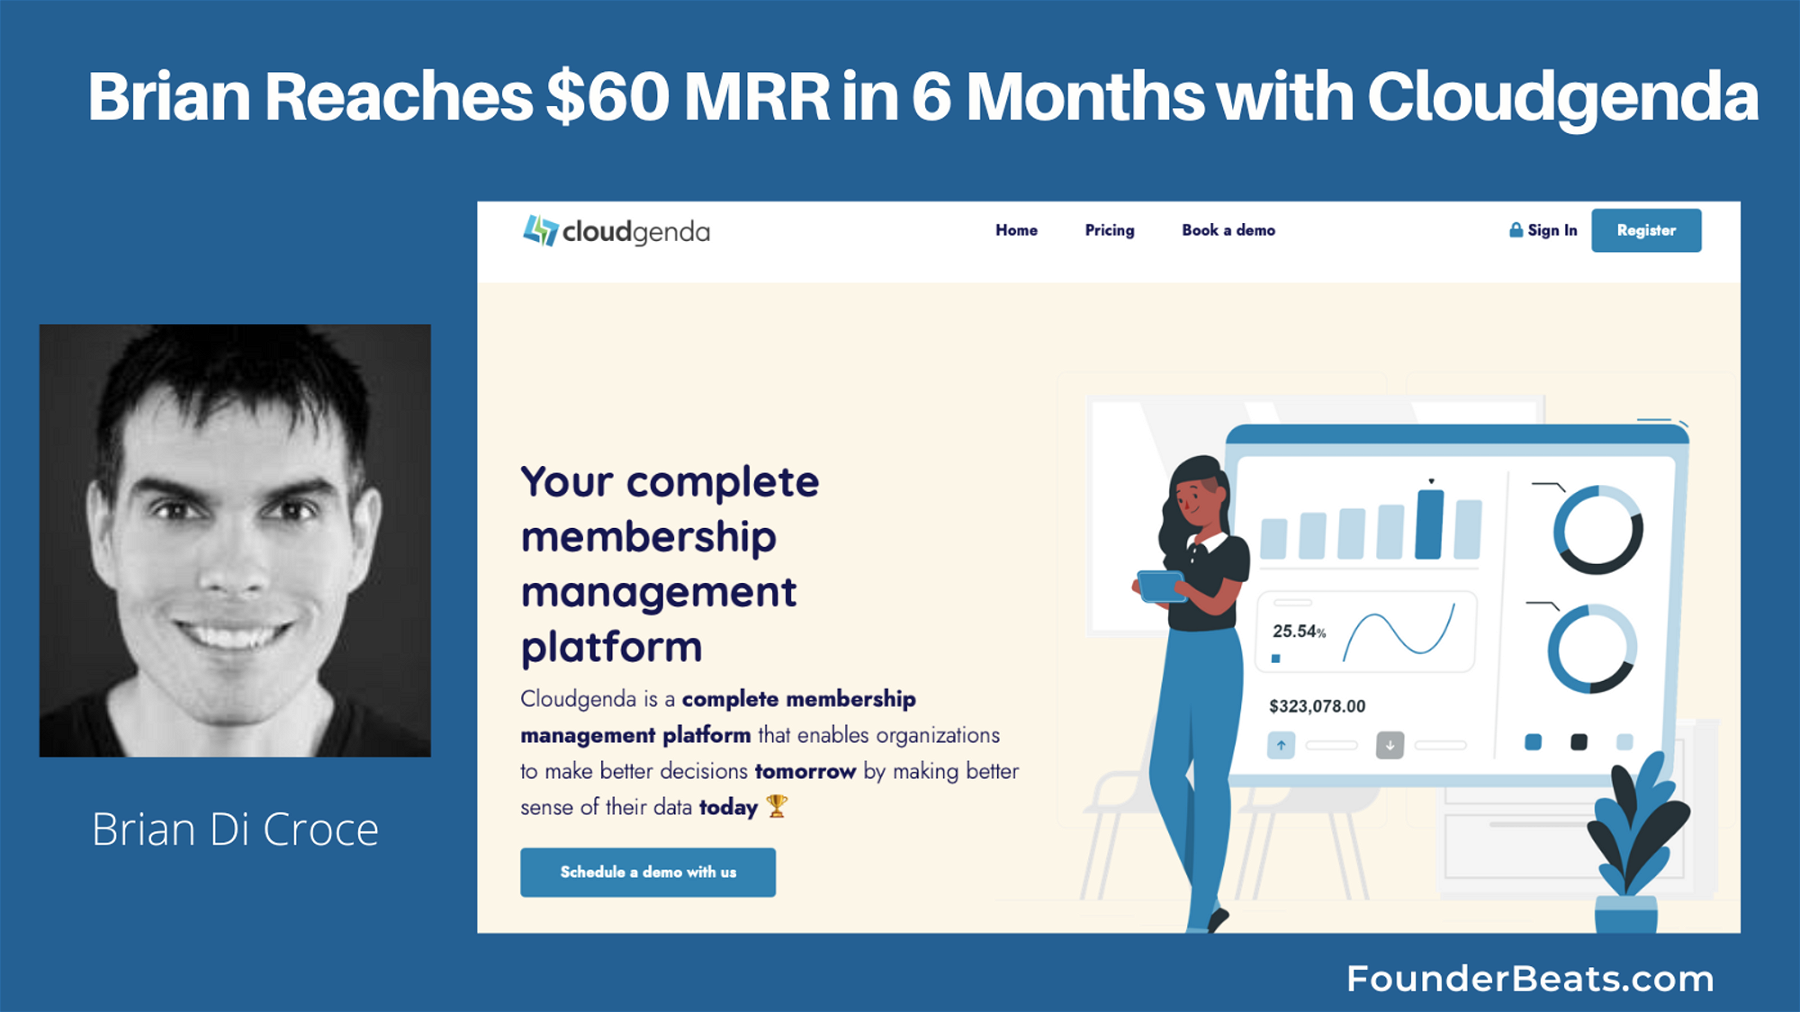 Typebot by Baptiste Arnaud Hits $1600 MRR in 20 Months